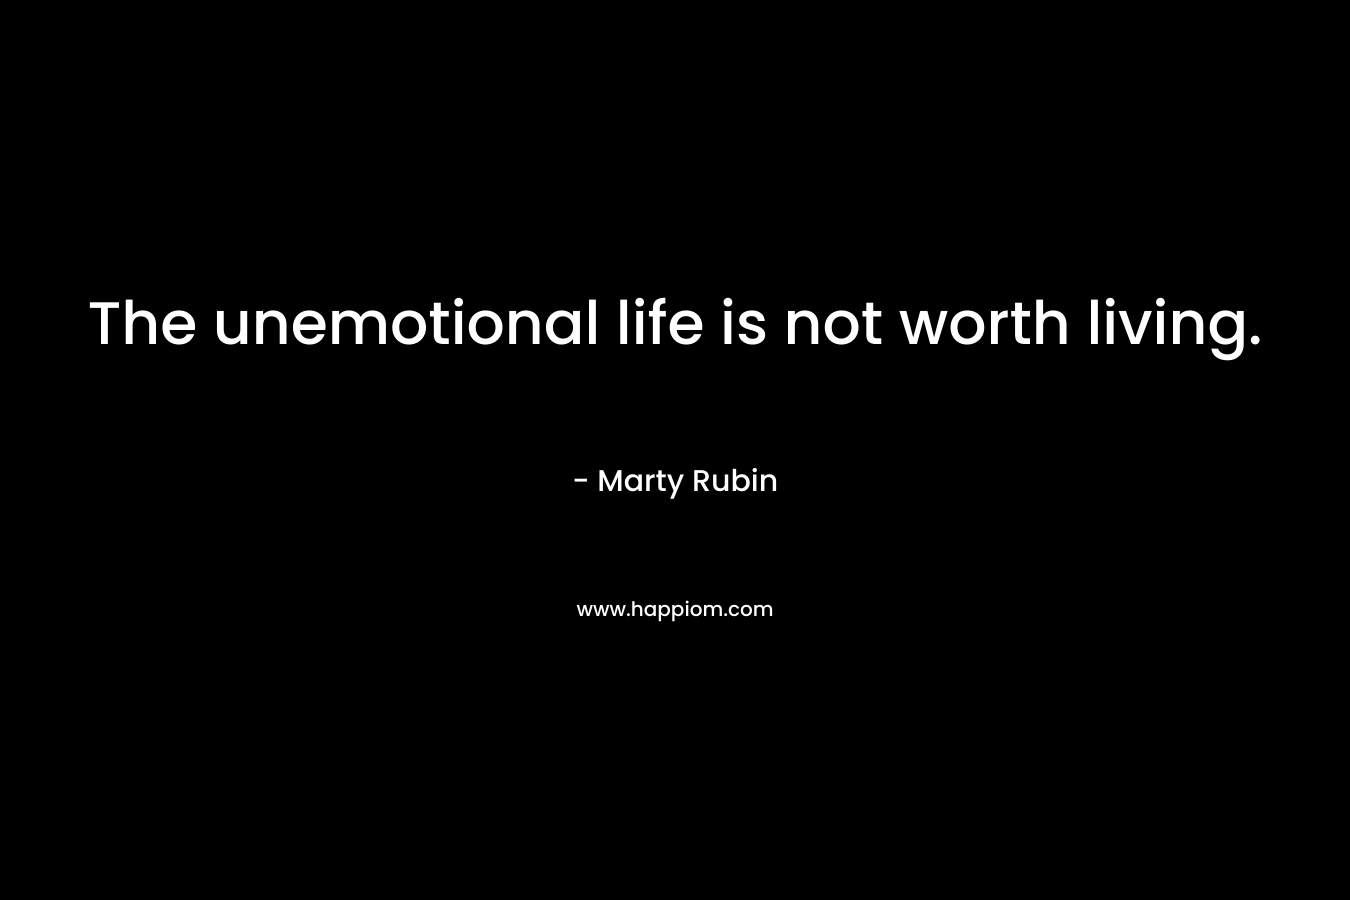 The unemotional life is not worth living.